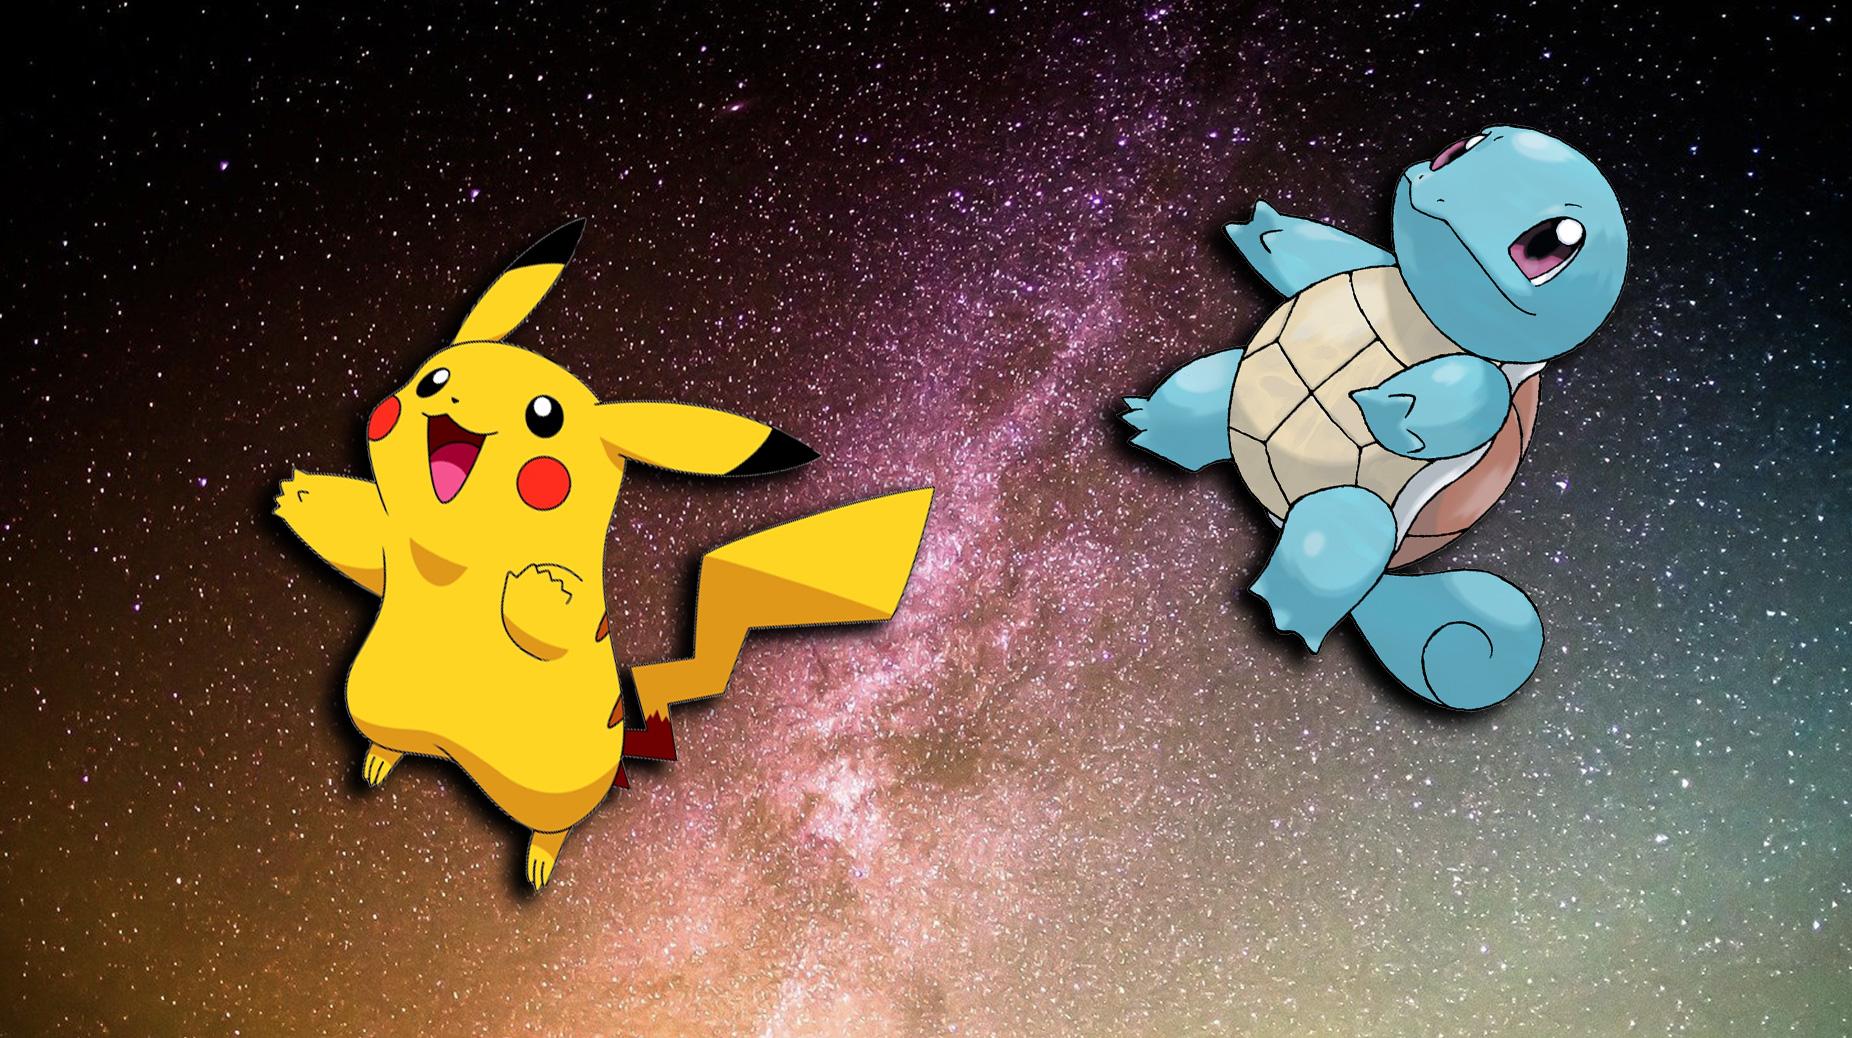 Screenshot of Pokemon Pikachu and Squritle flying in space.